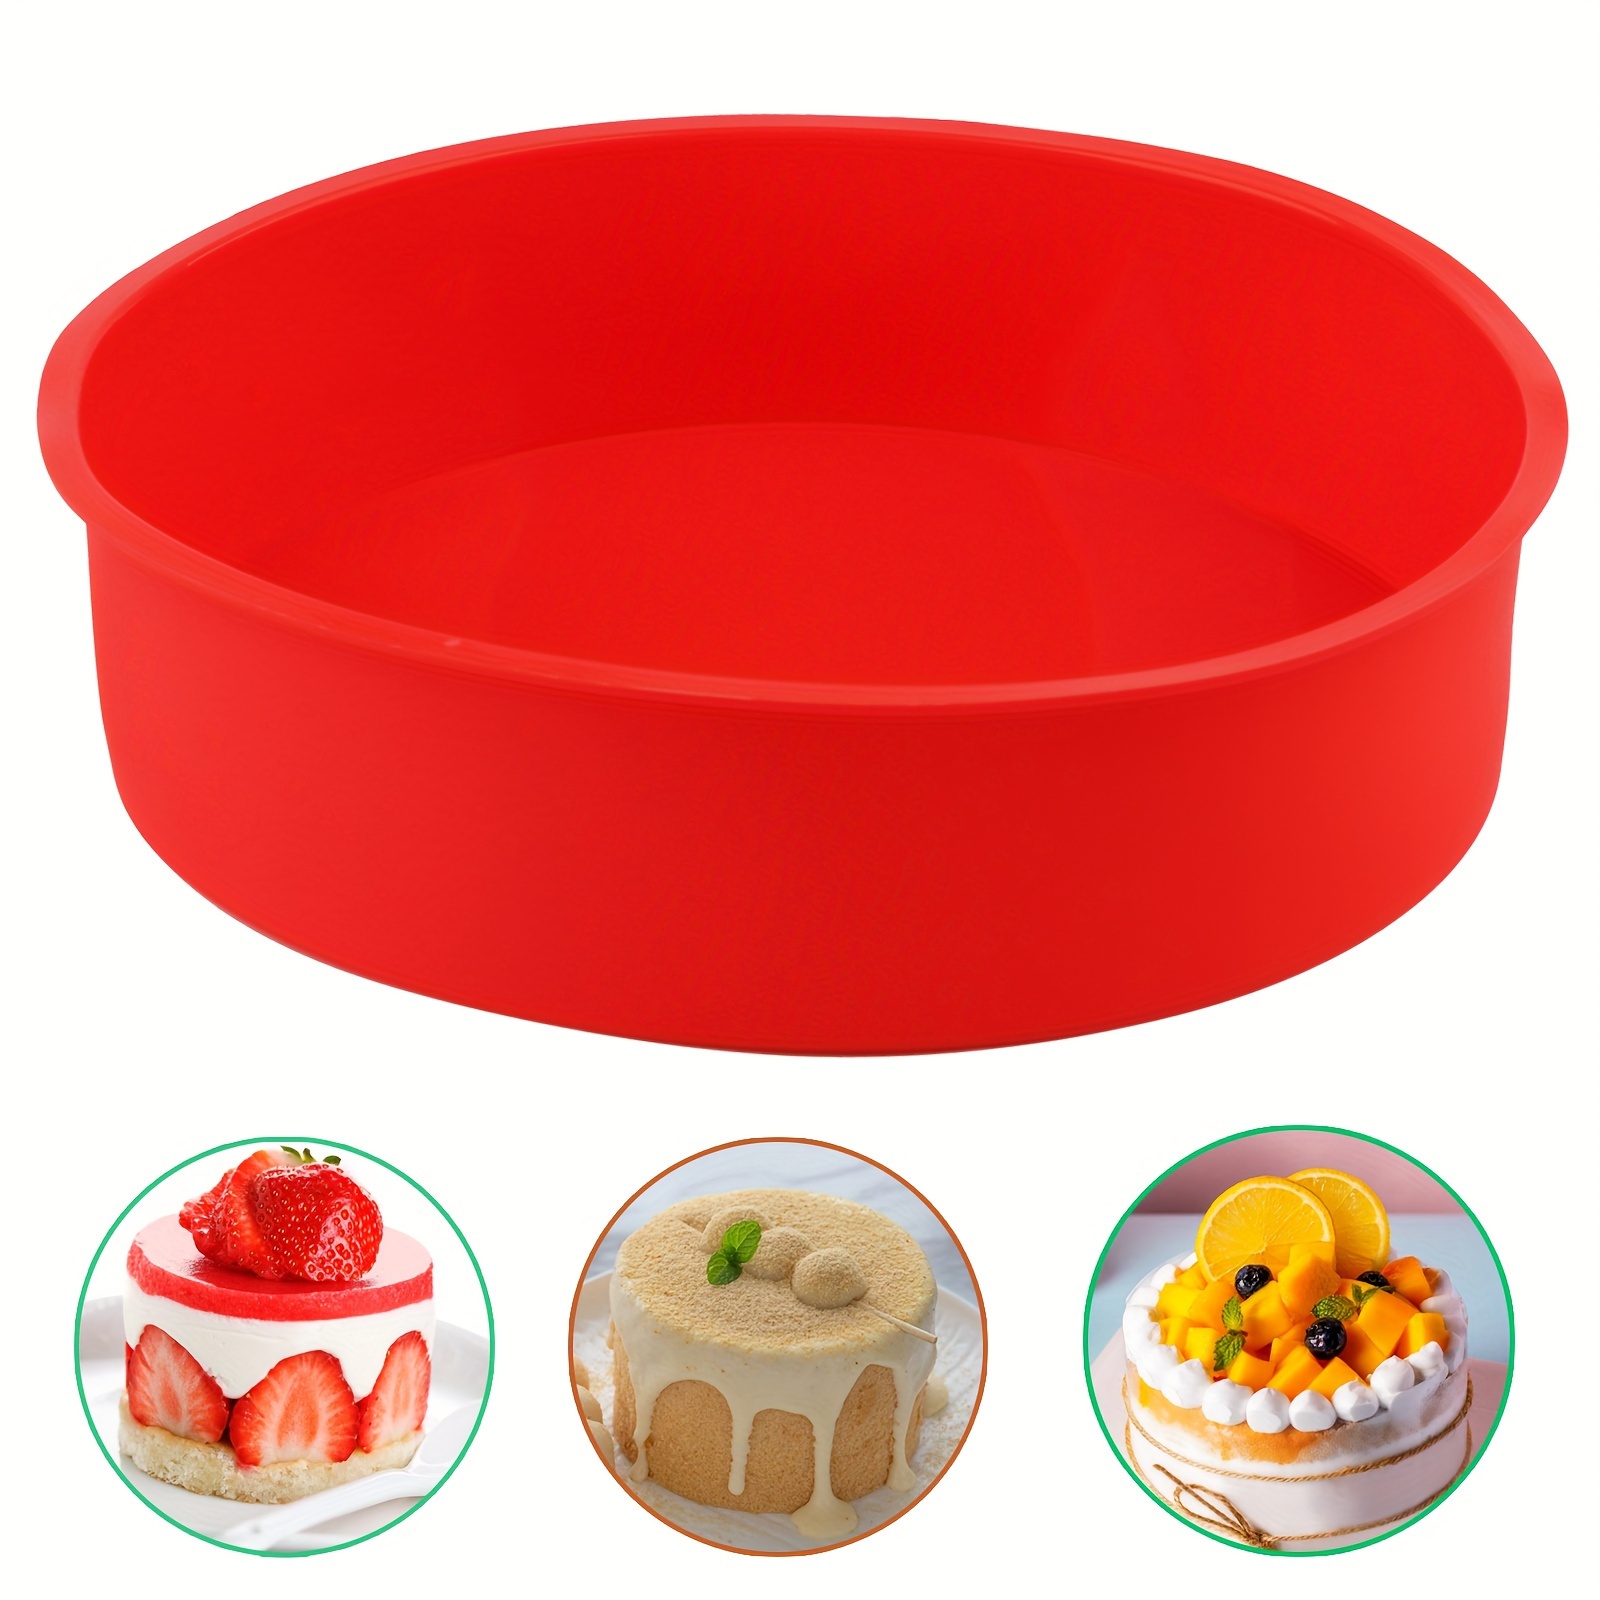 

1pc, 8 Inch Silicone Mini Cake Mold Red, Round Baking Pan, Non-stick Silicone Baking Molds, Bakeware, Reusable Cake Pans For Muffin, Cupcake, Layer Cake, Cheese Cake, Rainbow Cake